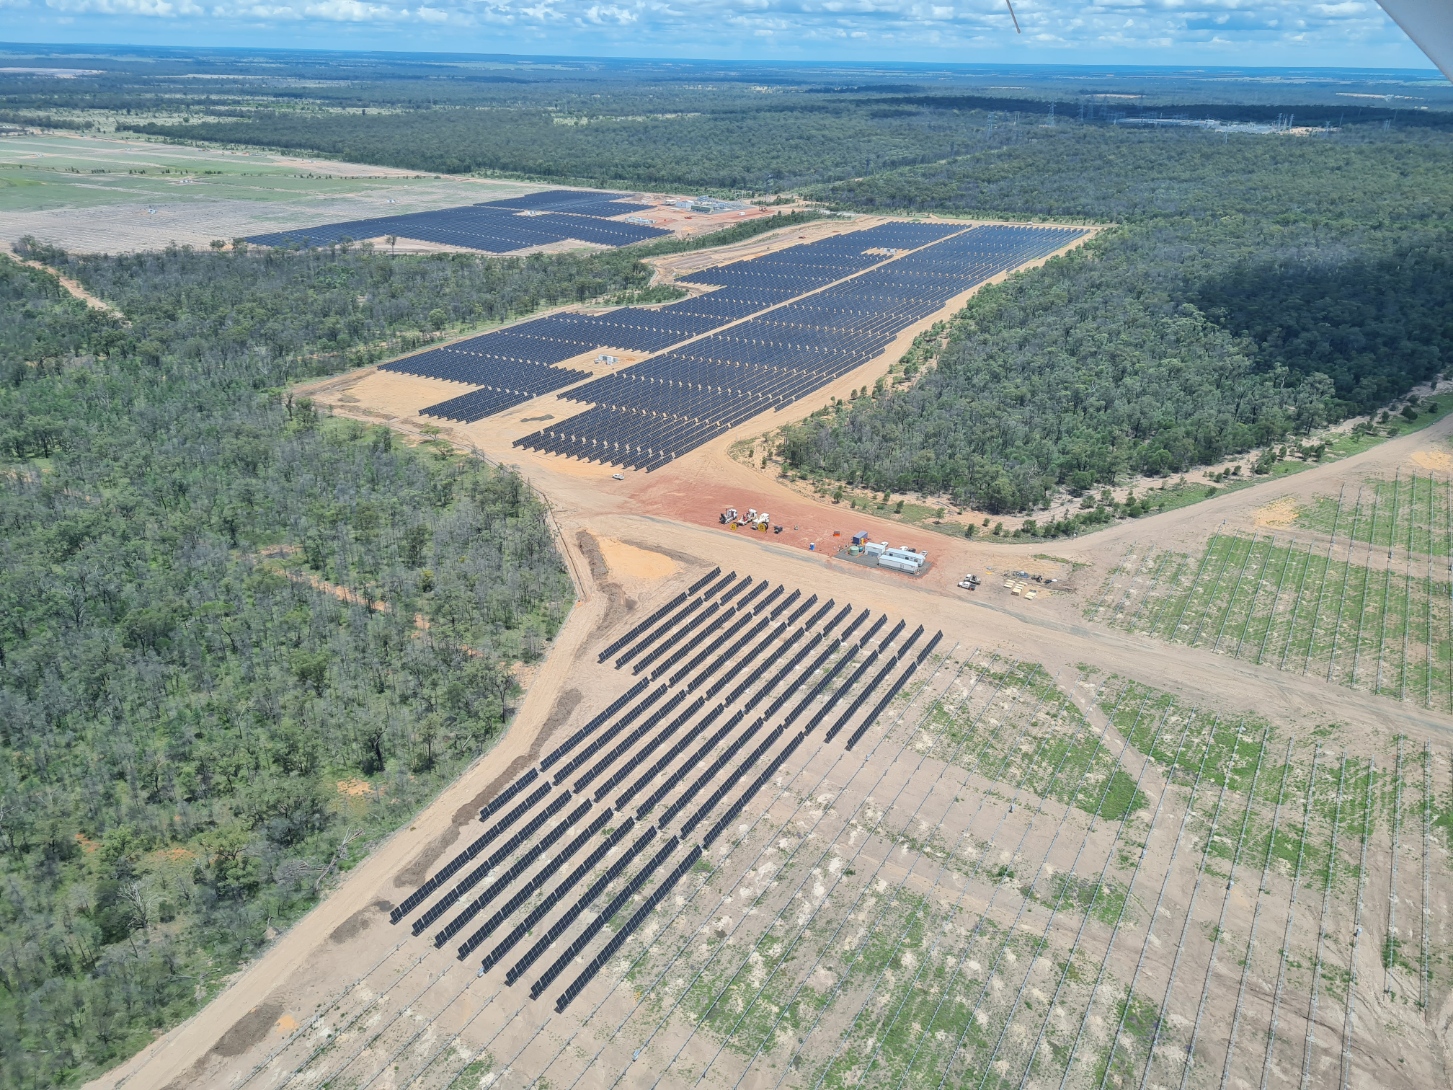 Then it was further east all the way to Kingaroy, past an extremely large solar farm, near Chinchilla. 